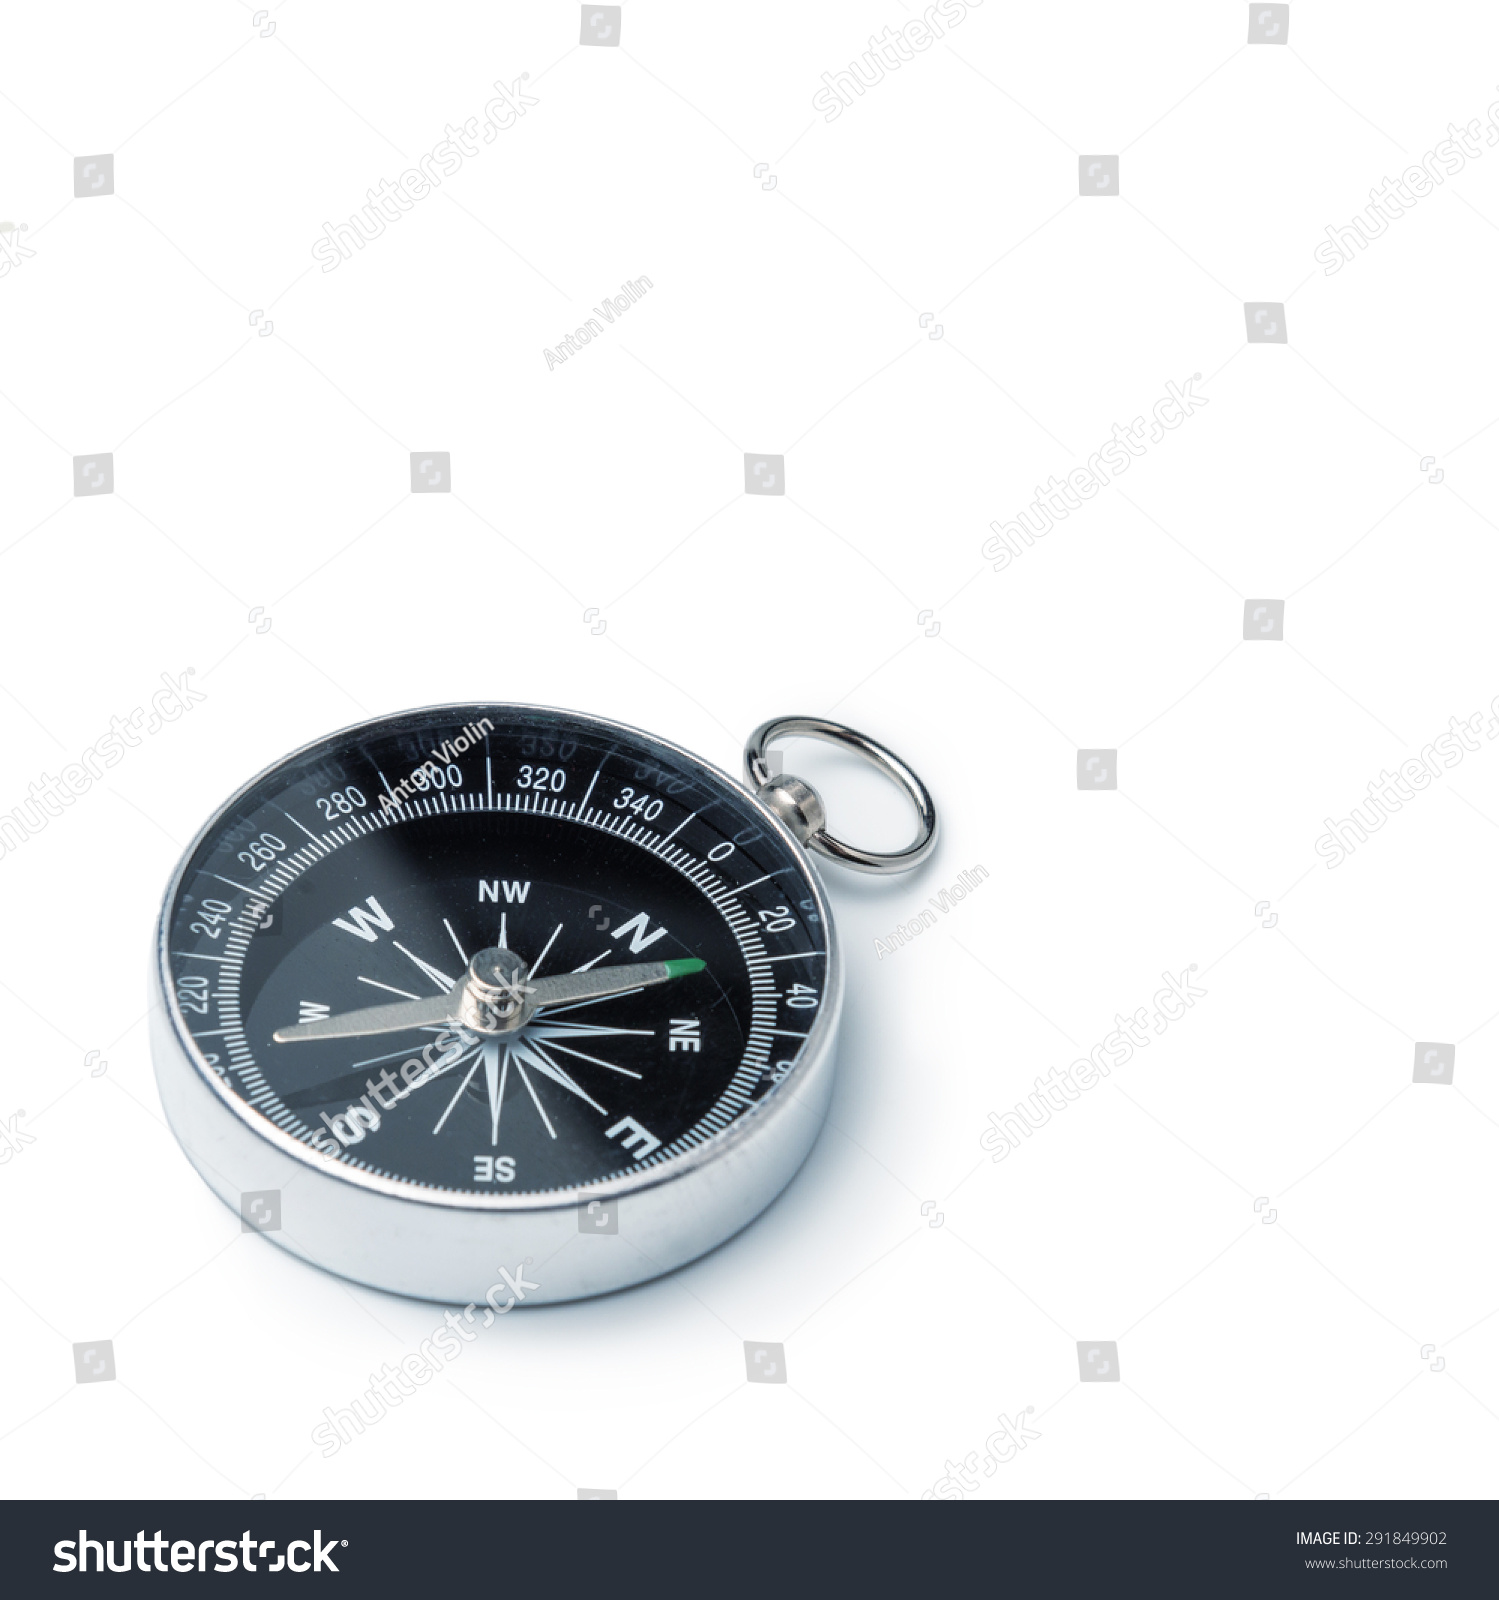 Classic compass isolated, shallow DOF, focus on dial #291849902